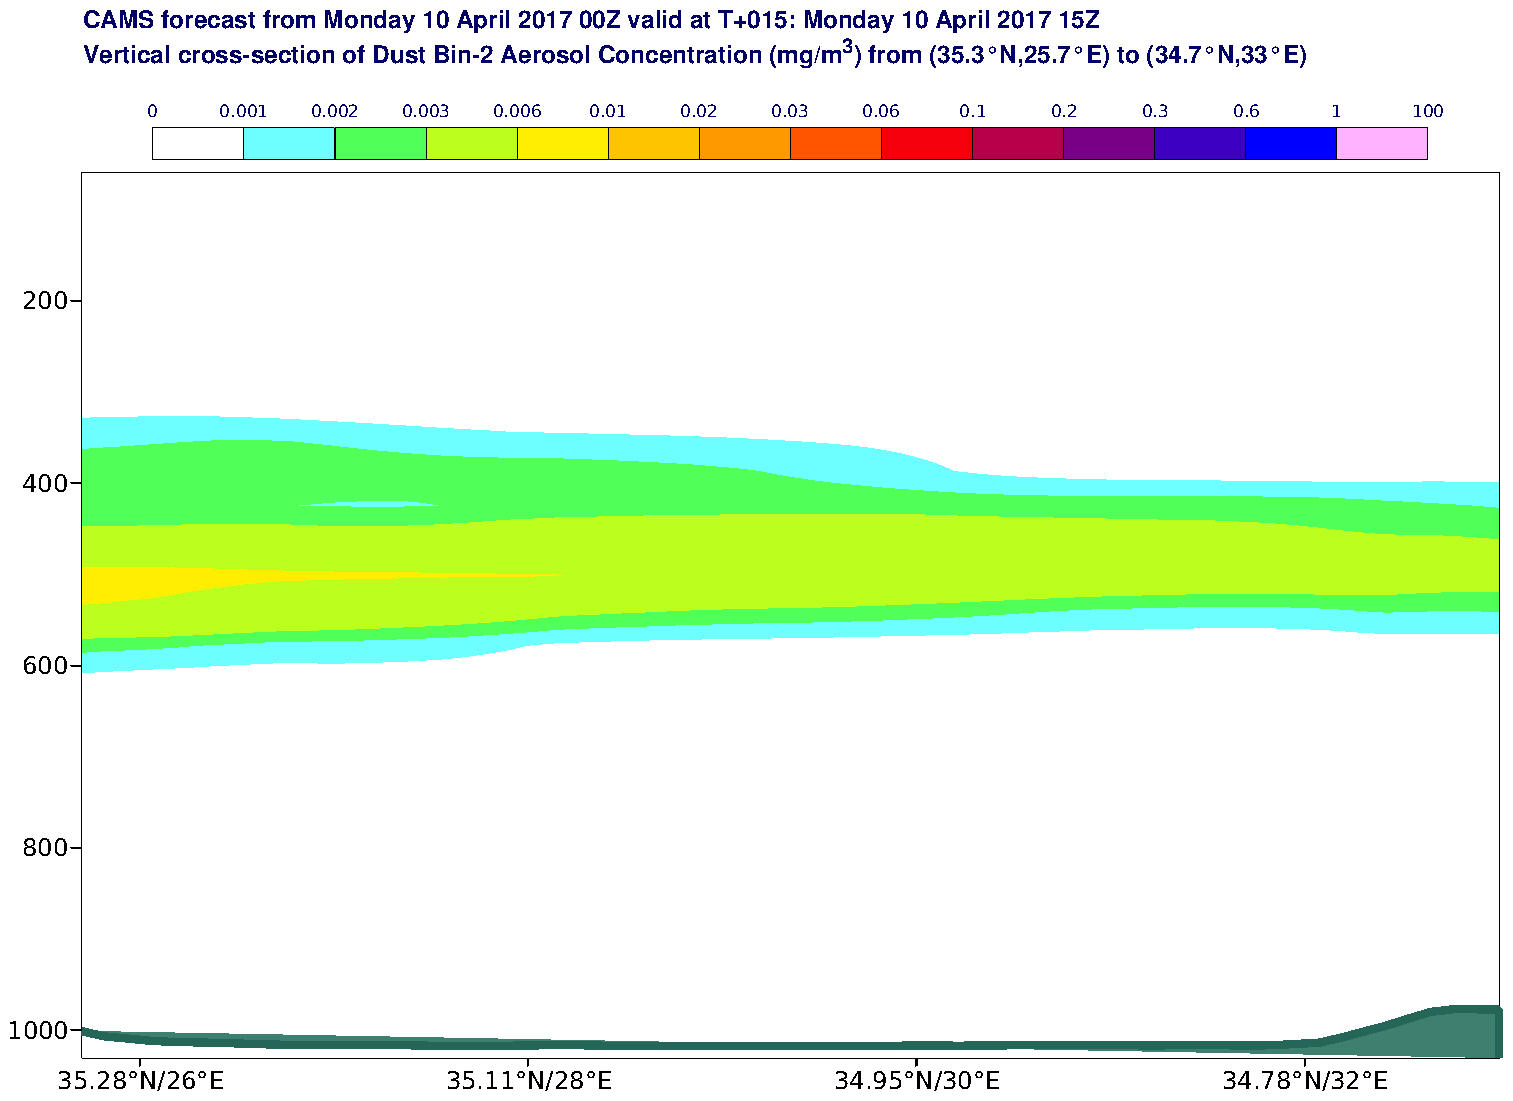 Vertical cross-section of Dust Bin-2 Aerosol Concentration (mg/m3) valid at T15 - 2017-04-10 15:00